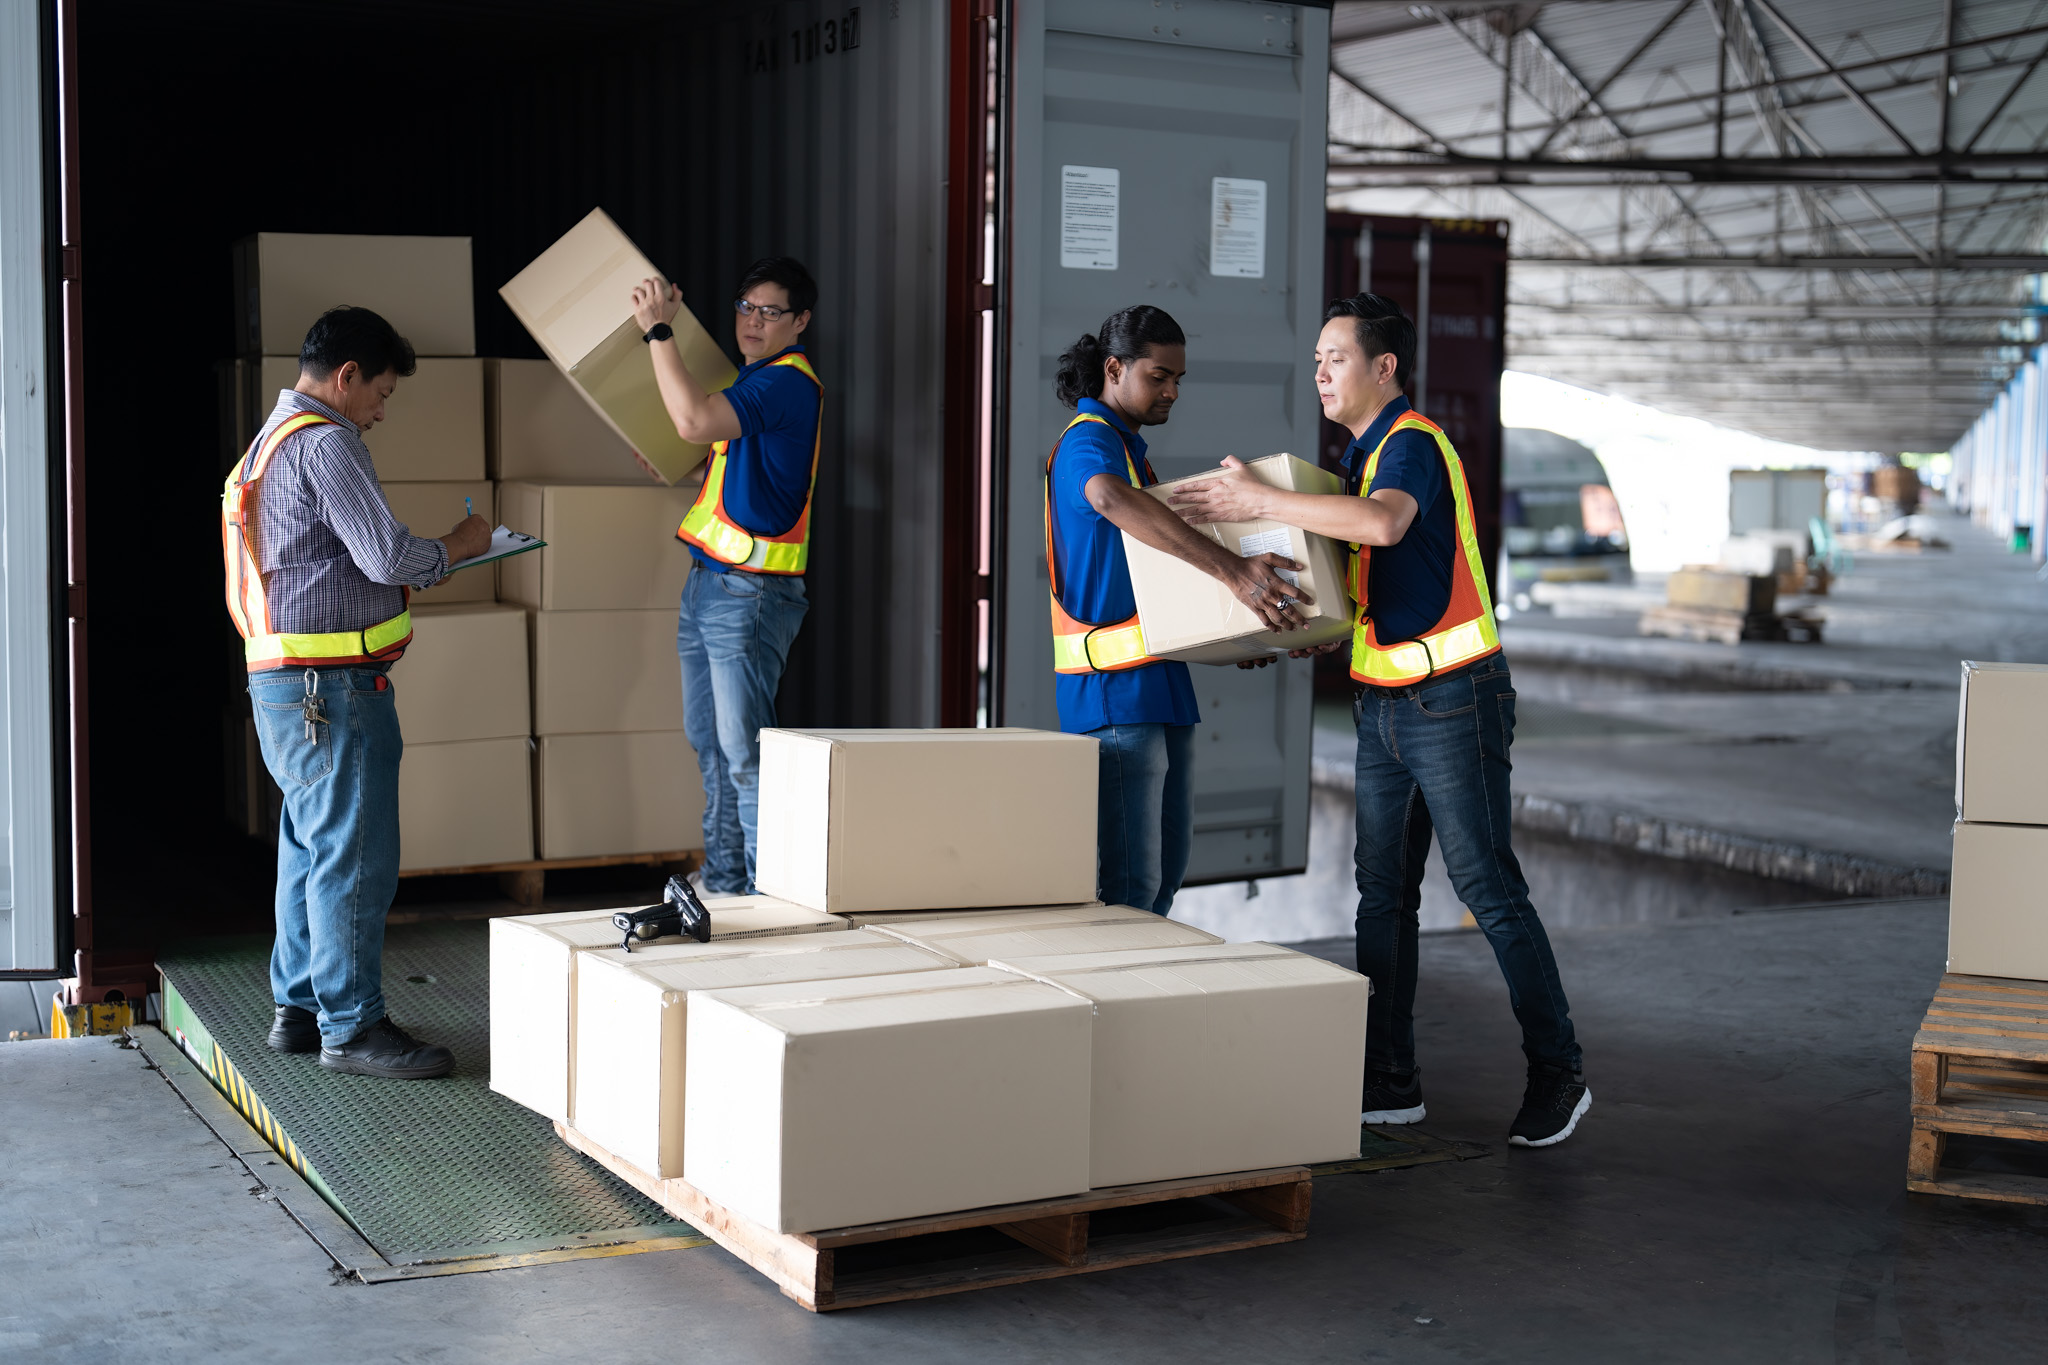 CPM crew diligently packing and loading boxes for international shipping, emphasizing global moving expertise.